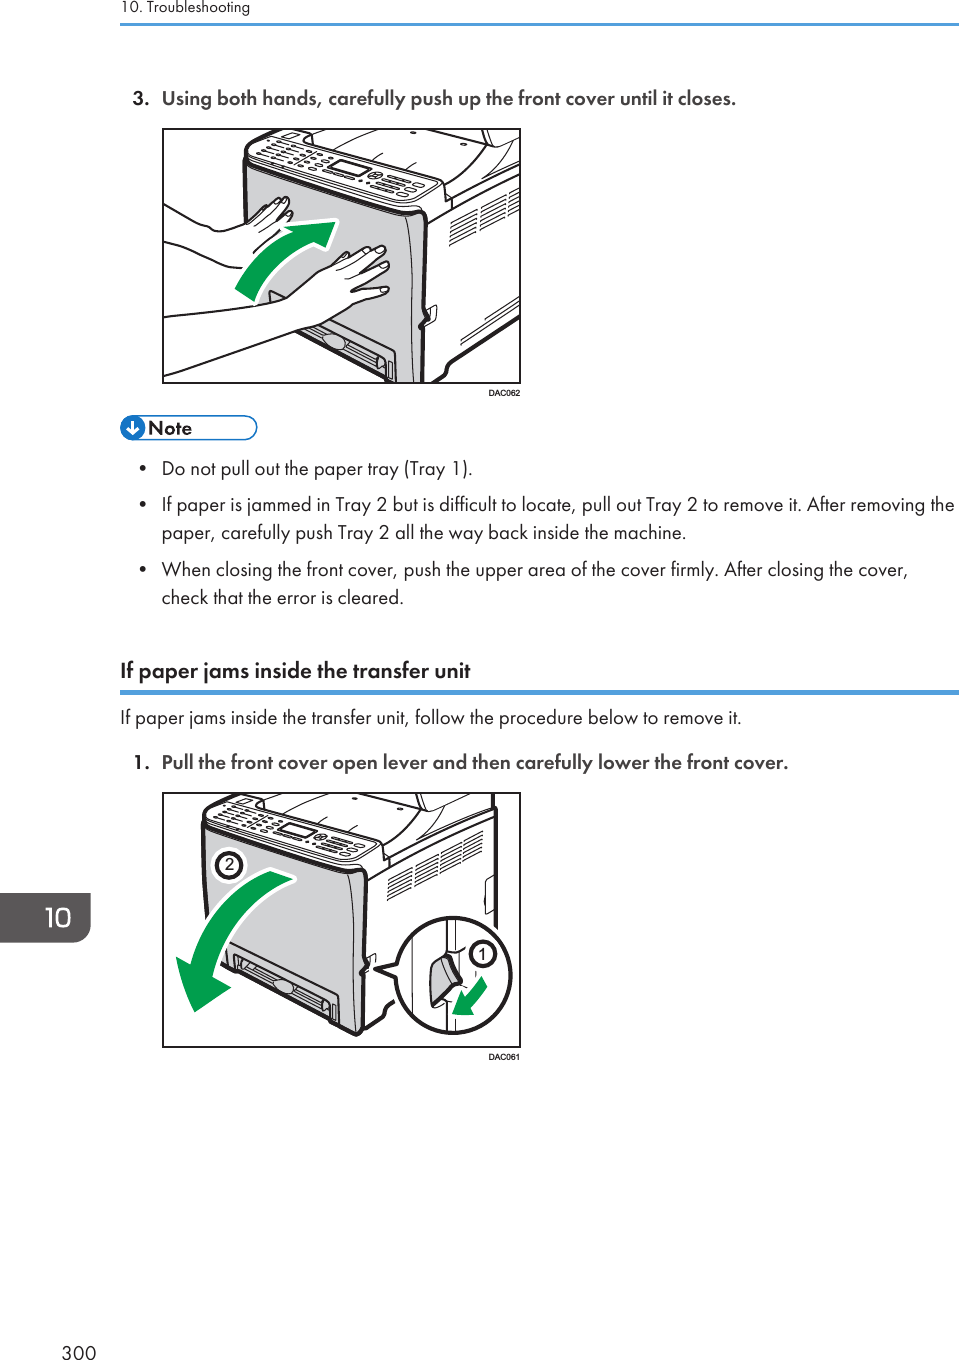 3. Using both hands, carefully push up the front cover until it closes.DAC062• Do not pull out the paper tray (Tray 1).• If paper is jammed in Tray 2 but is difficult to locate, pull out Tray 2 to remove it. After removing thepaper, carefully push Tray 2 all the way back inside the machine.• When closing the front cover, push the upper area of the cover firmly. After closing the cover,check that the error is cleared.If paper jams inside the transfer unitIf paper jams inside the transfer unit, follow the procedure below to remove it.1. Pull the front cover open lever and then carefully lower the front cover.21DAC06110. Troubleshooting300